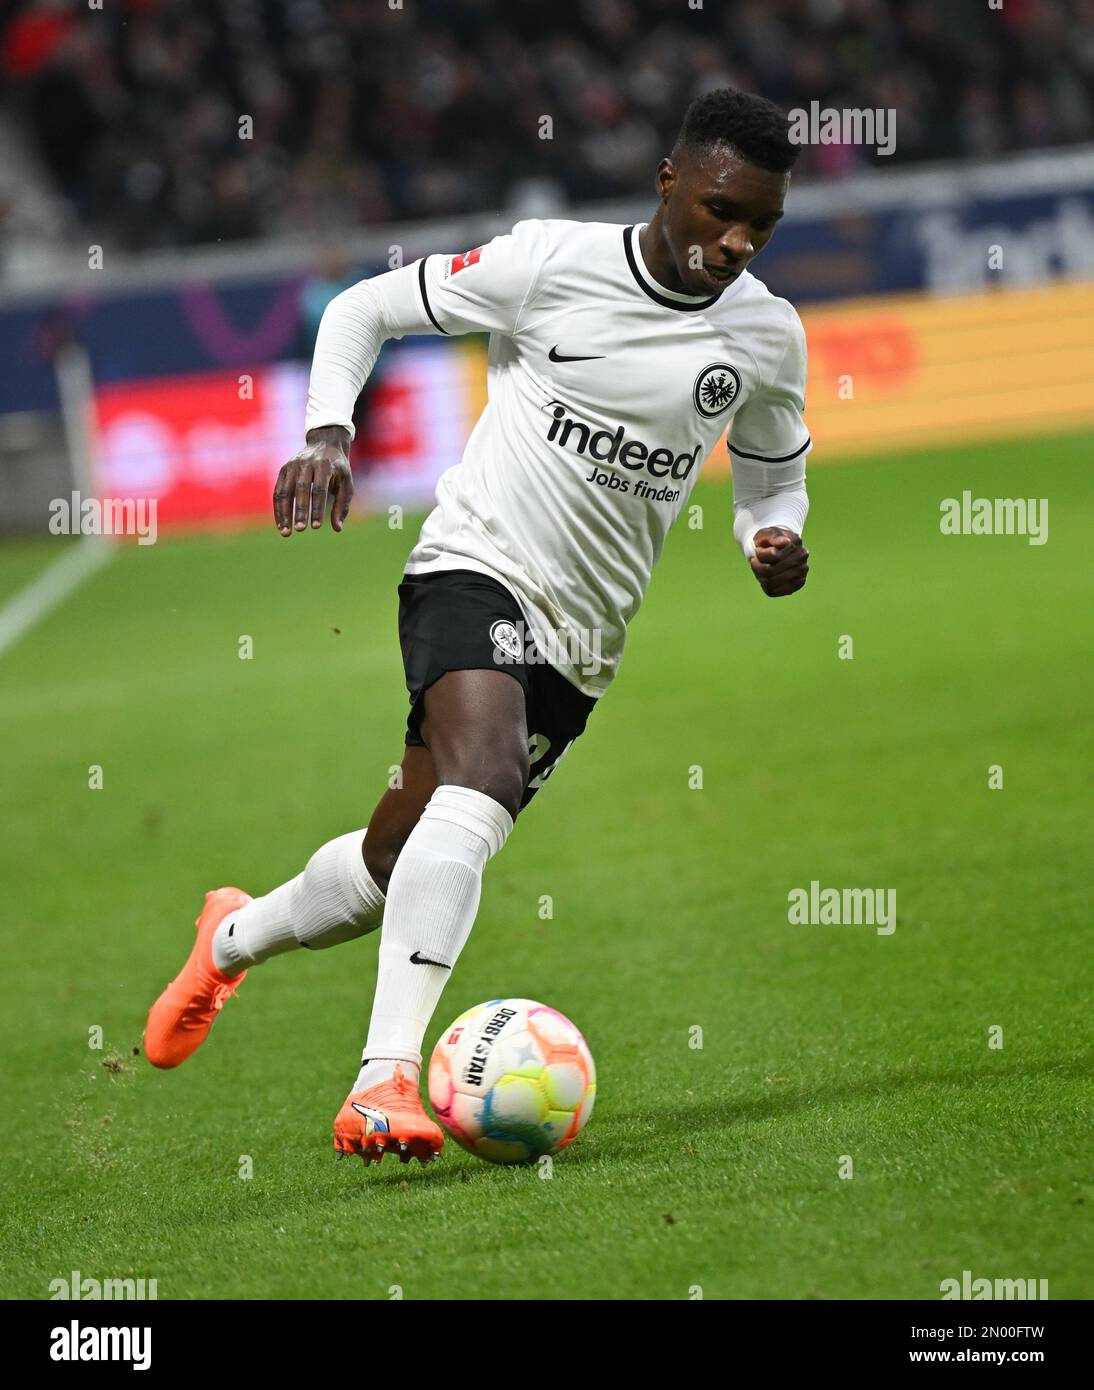 04 February 2023, Hesse, Frankfurt/Main: Soccer: Bundesliga, Eintracht Frankfurt - Hertha BSC, Matchday 19 at Deutsche Bank Park. Frankfurt's Randal Kolo Muani in action. Photo: Arne Dedert/dpa - IMPORTANT NOTE: In accordance with the requirements of the DFL Deutsche Fußball Liga and the DFB Deutscher Fußball-Bund, it is prohibited to use or have used photographs taken in the stadium and/or of the match in the form of sequence pictures and/or video-like photo series. Stock Photo